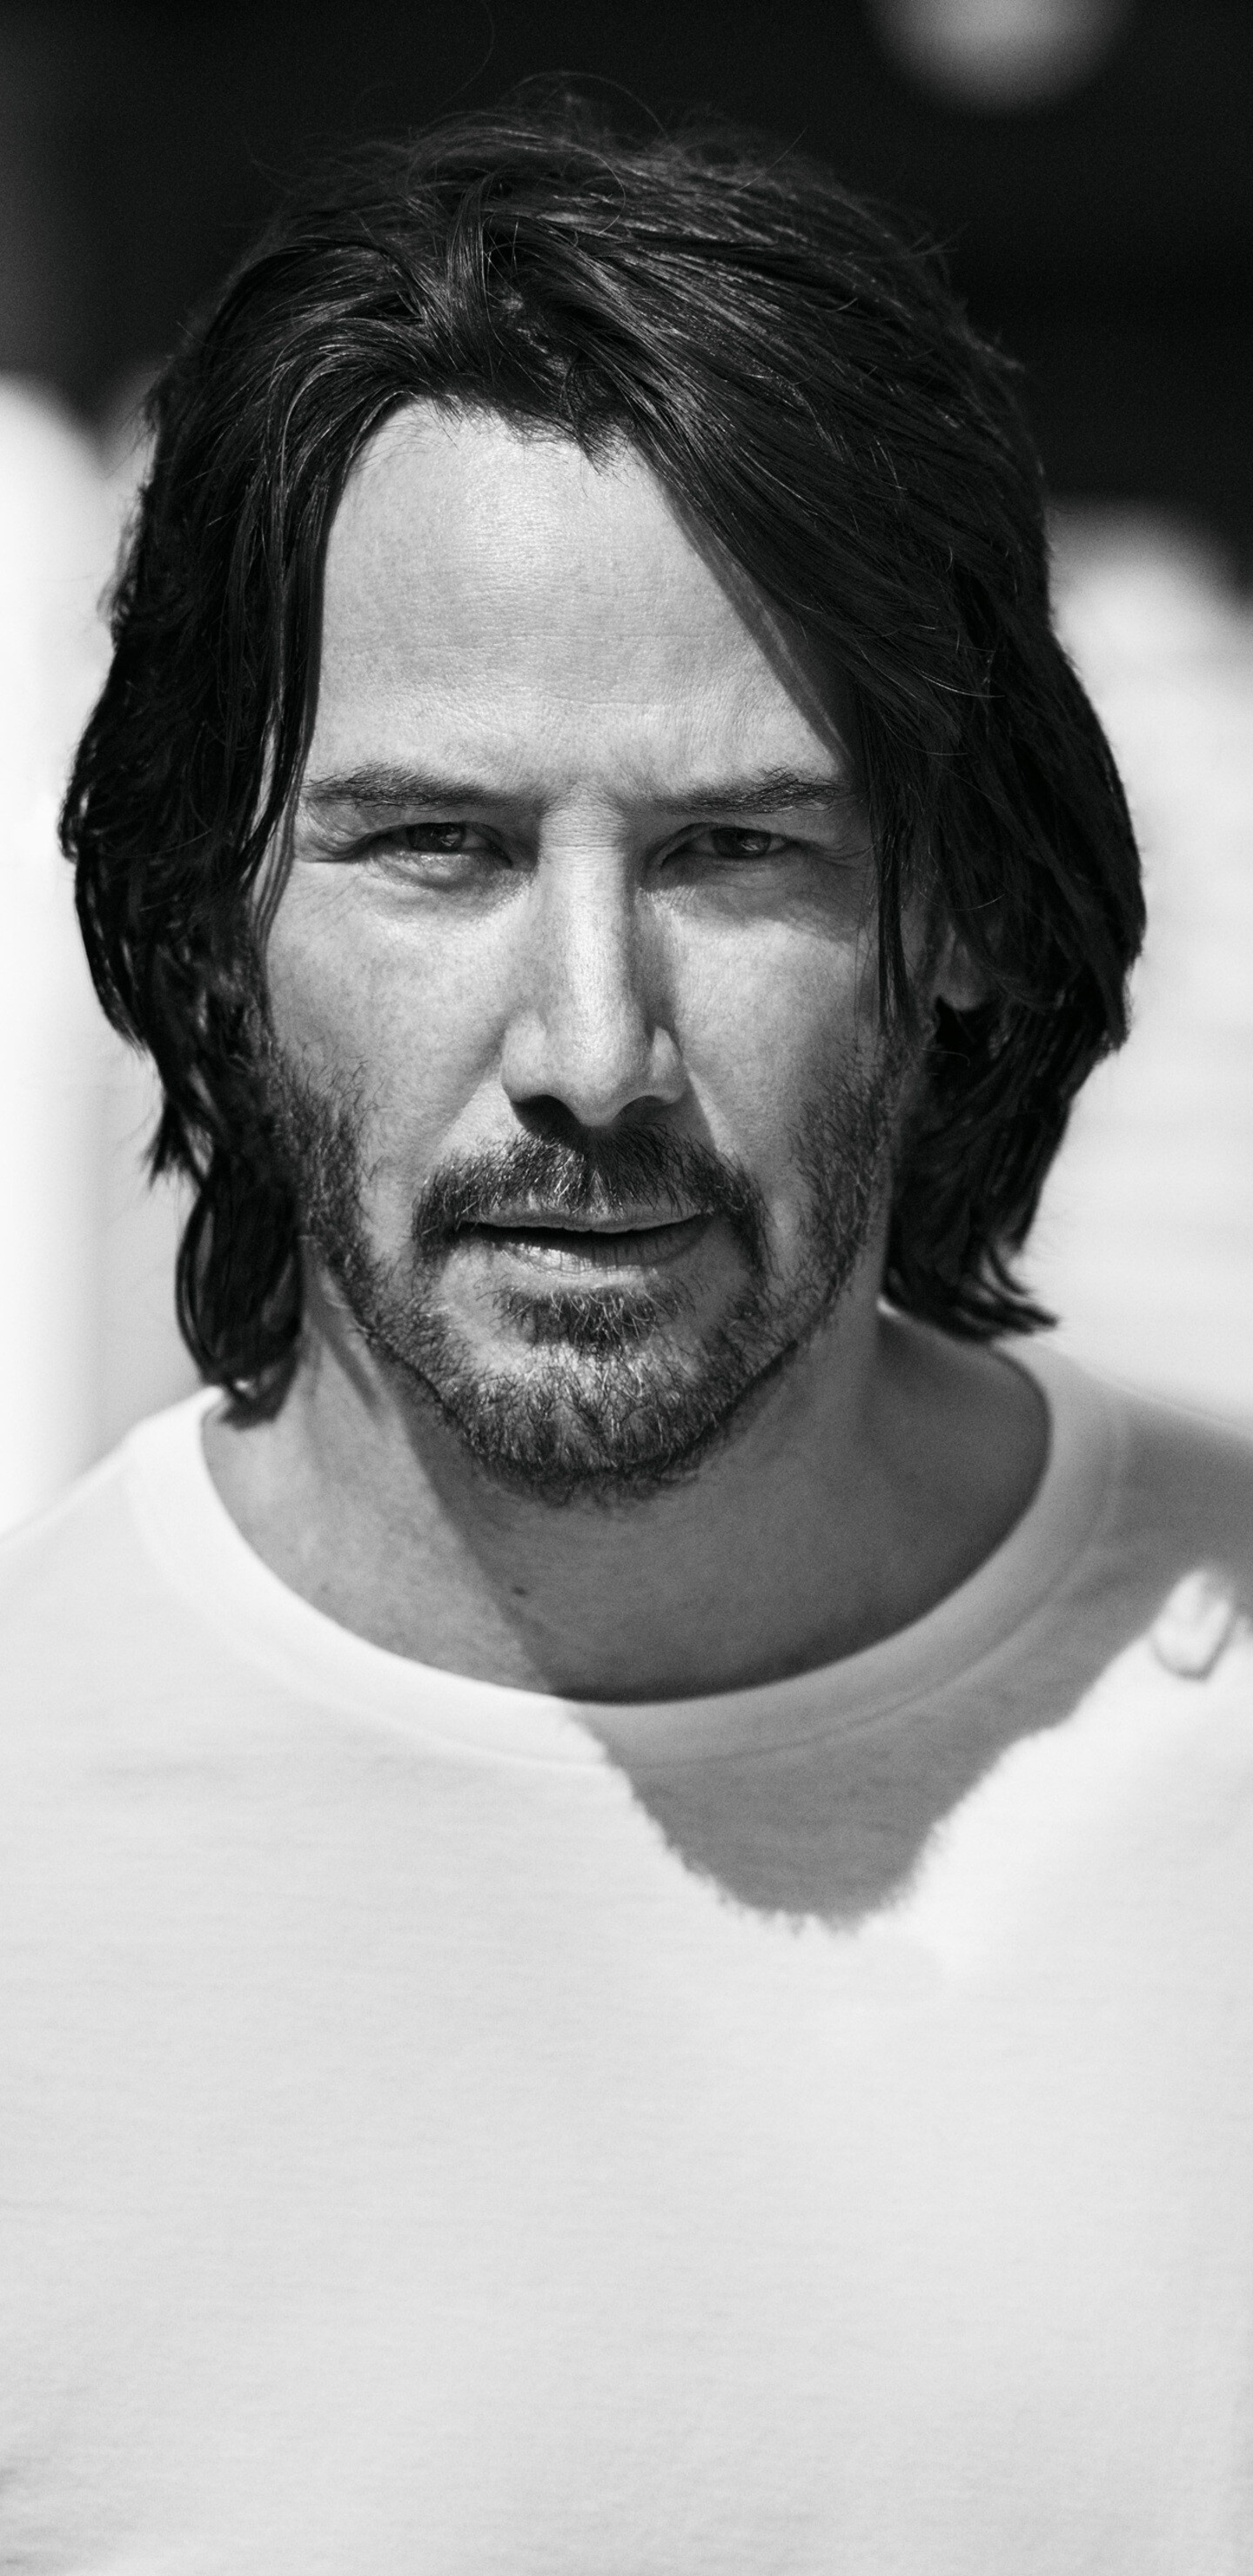 Keanu Reeves: Actor, Breakthrough with “Bill and Ted’s Excellent Adventure”. 1440x2960 HD Wallpaper.